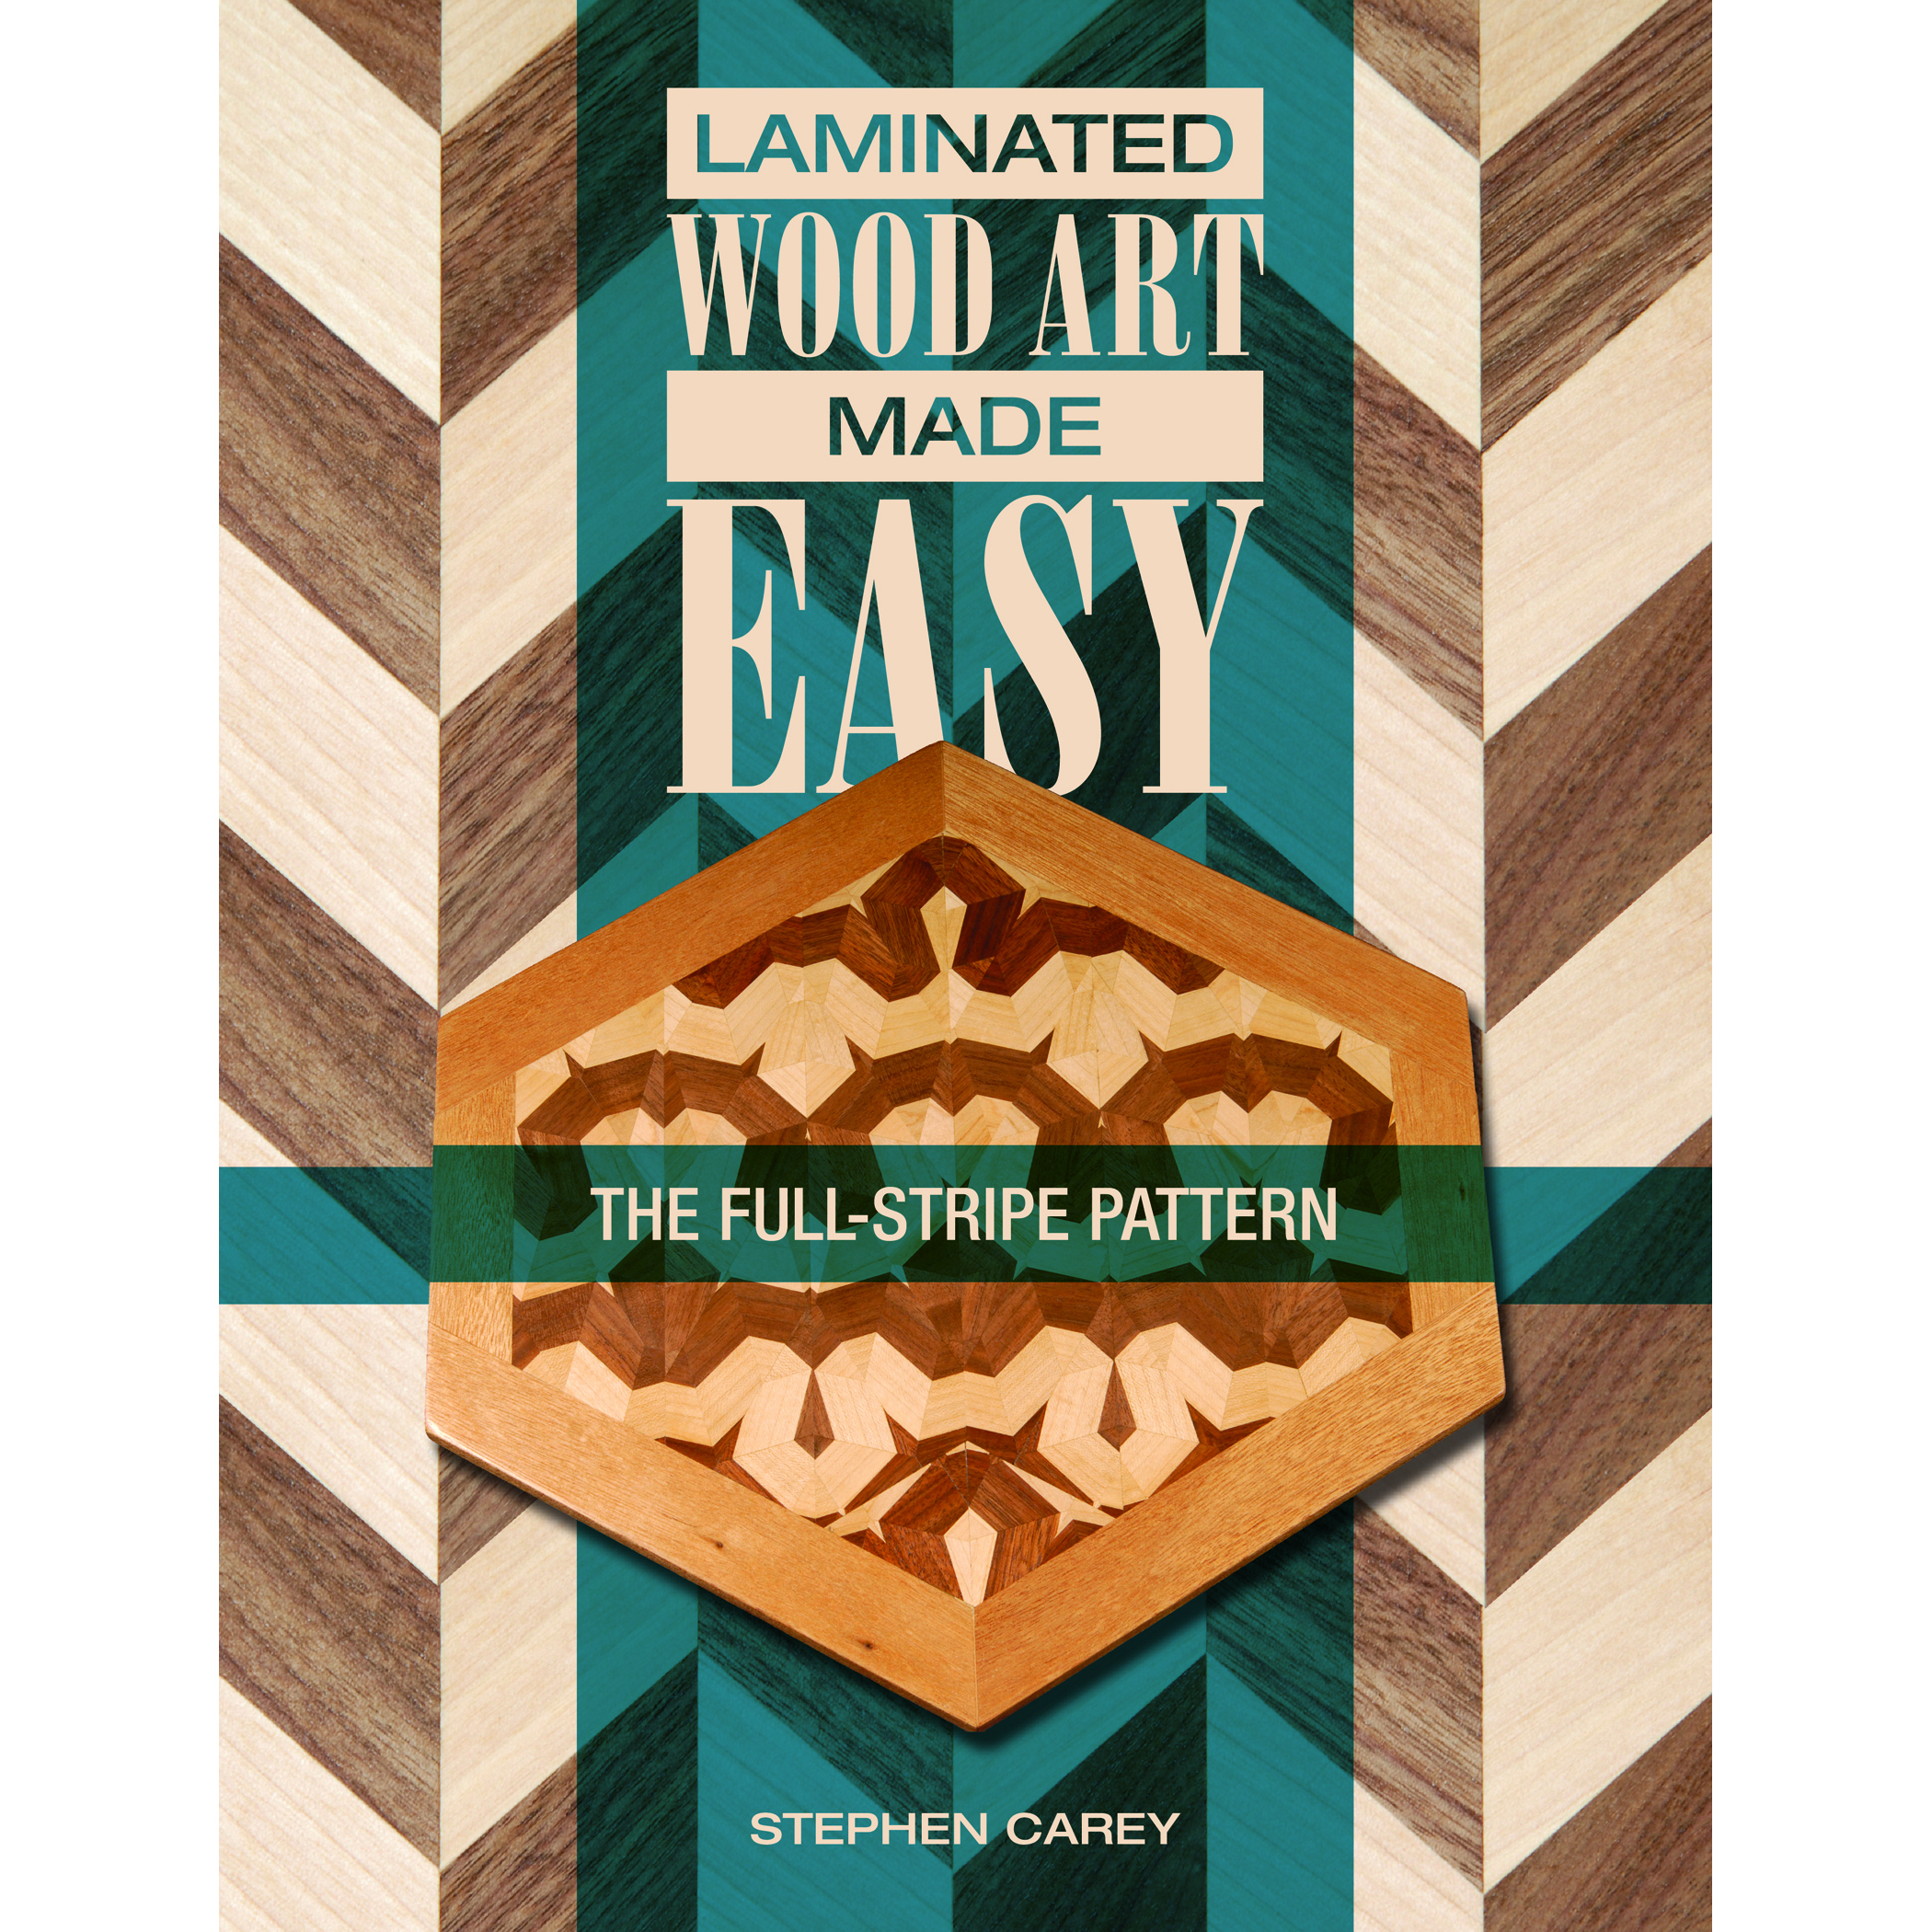 Laminated Wood Art Made Easy: The Full-stripe Pattern